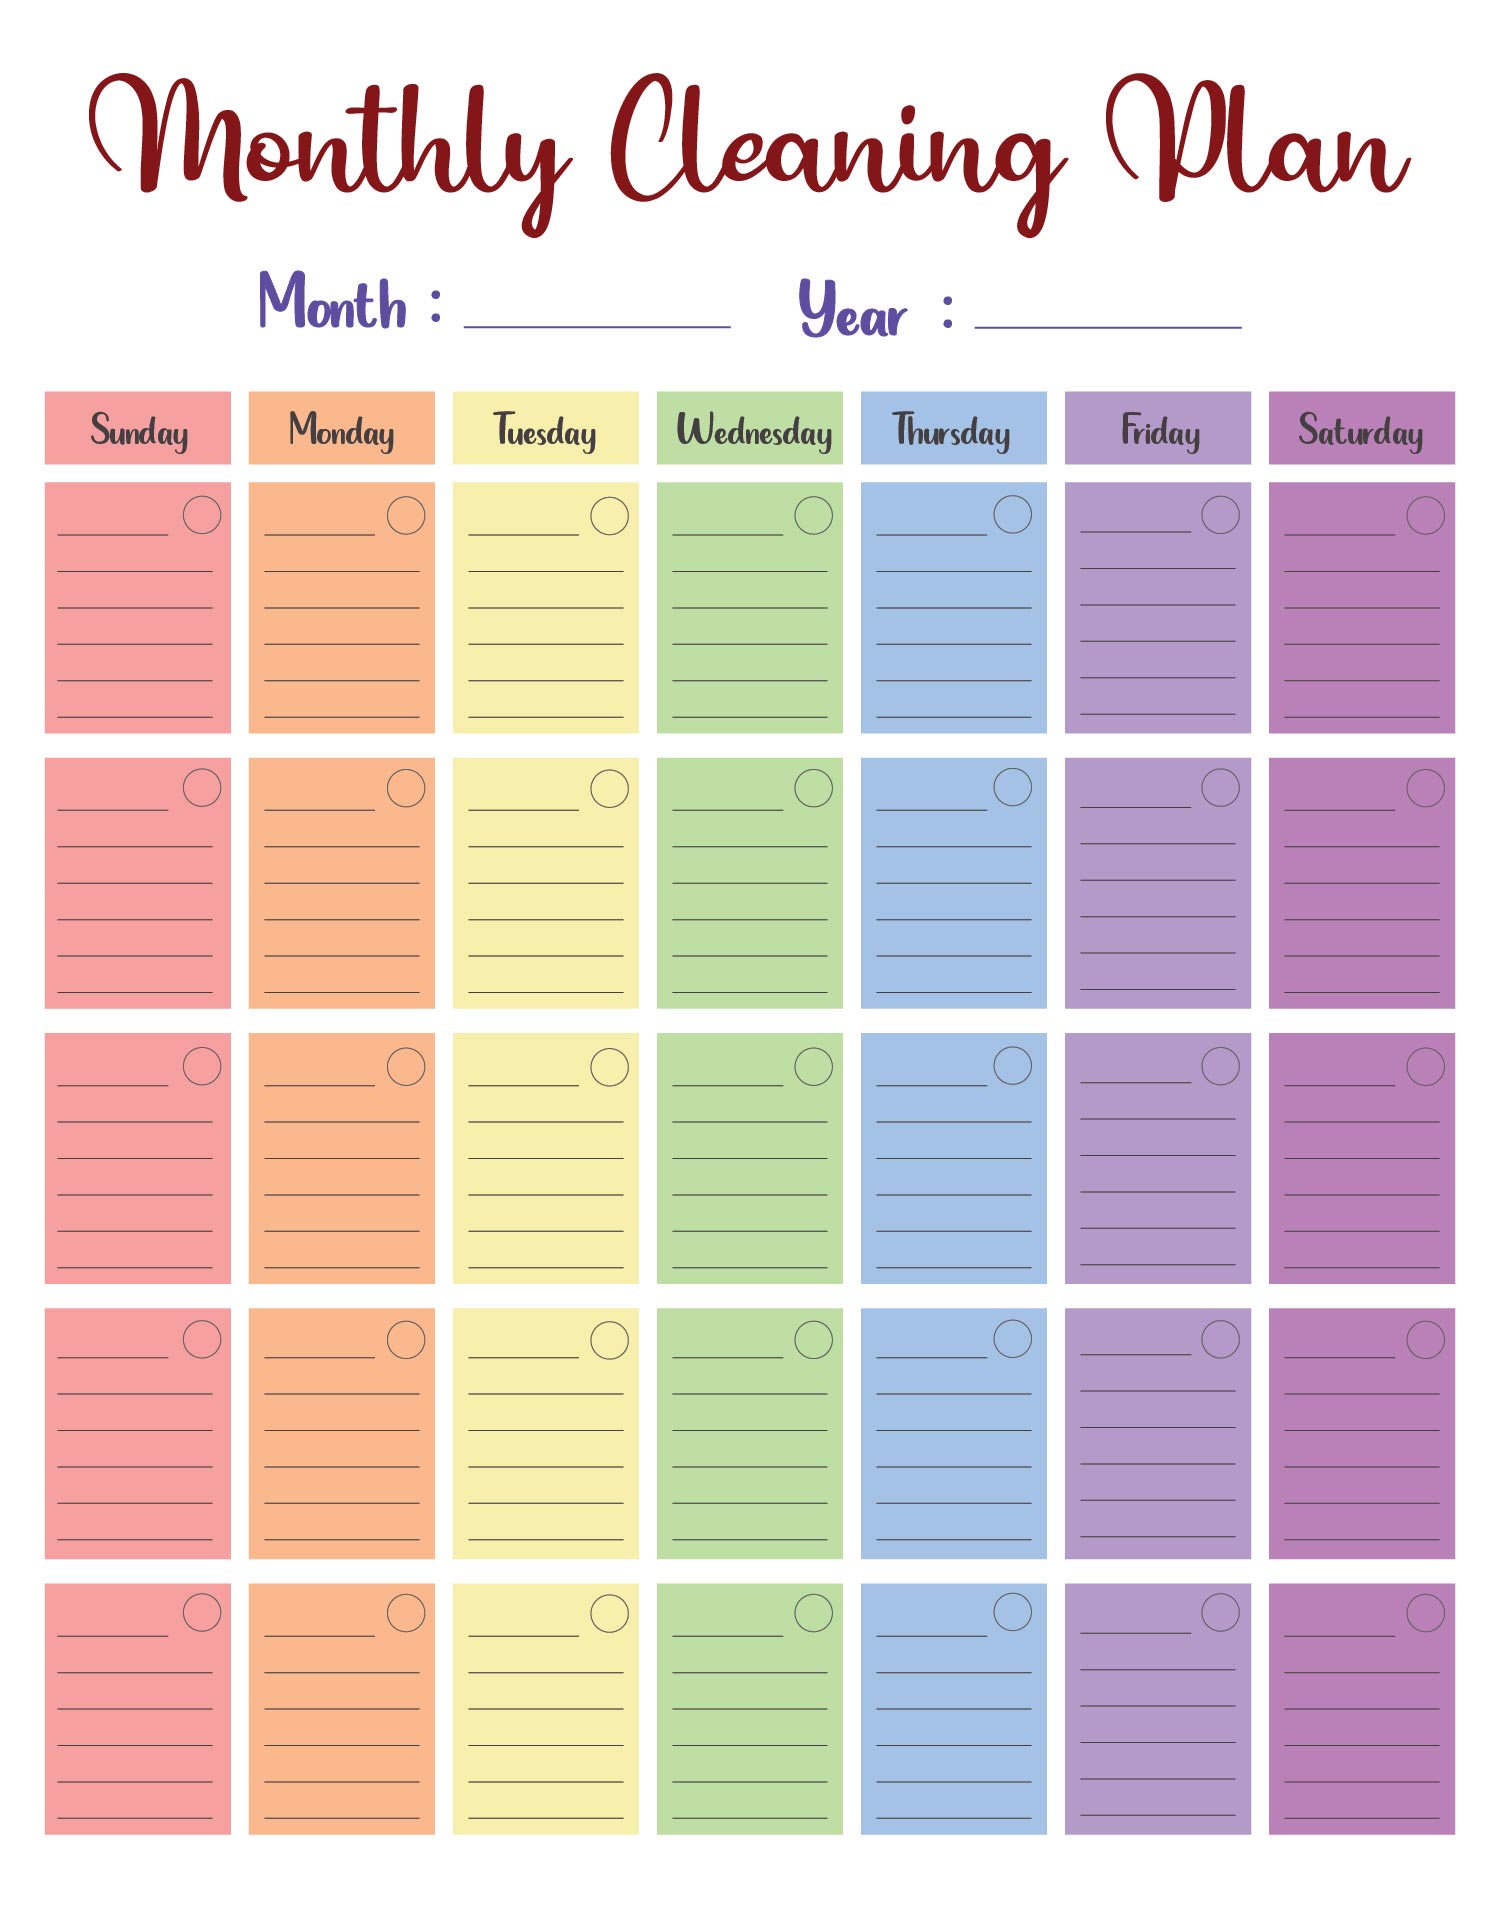 8-best-images-of-printable-monthly-cleaning-checklist-monthly